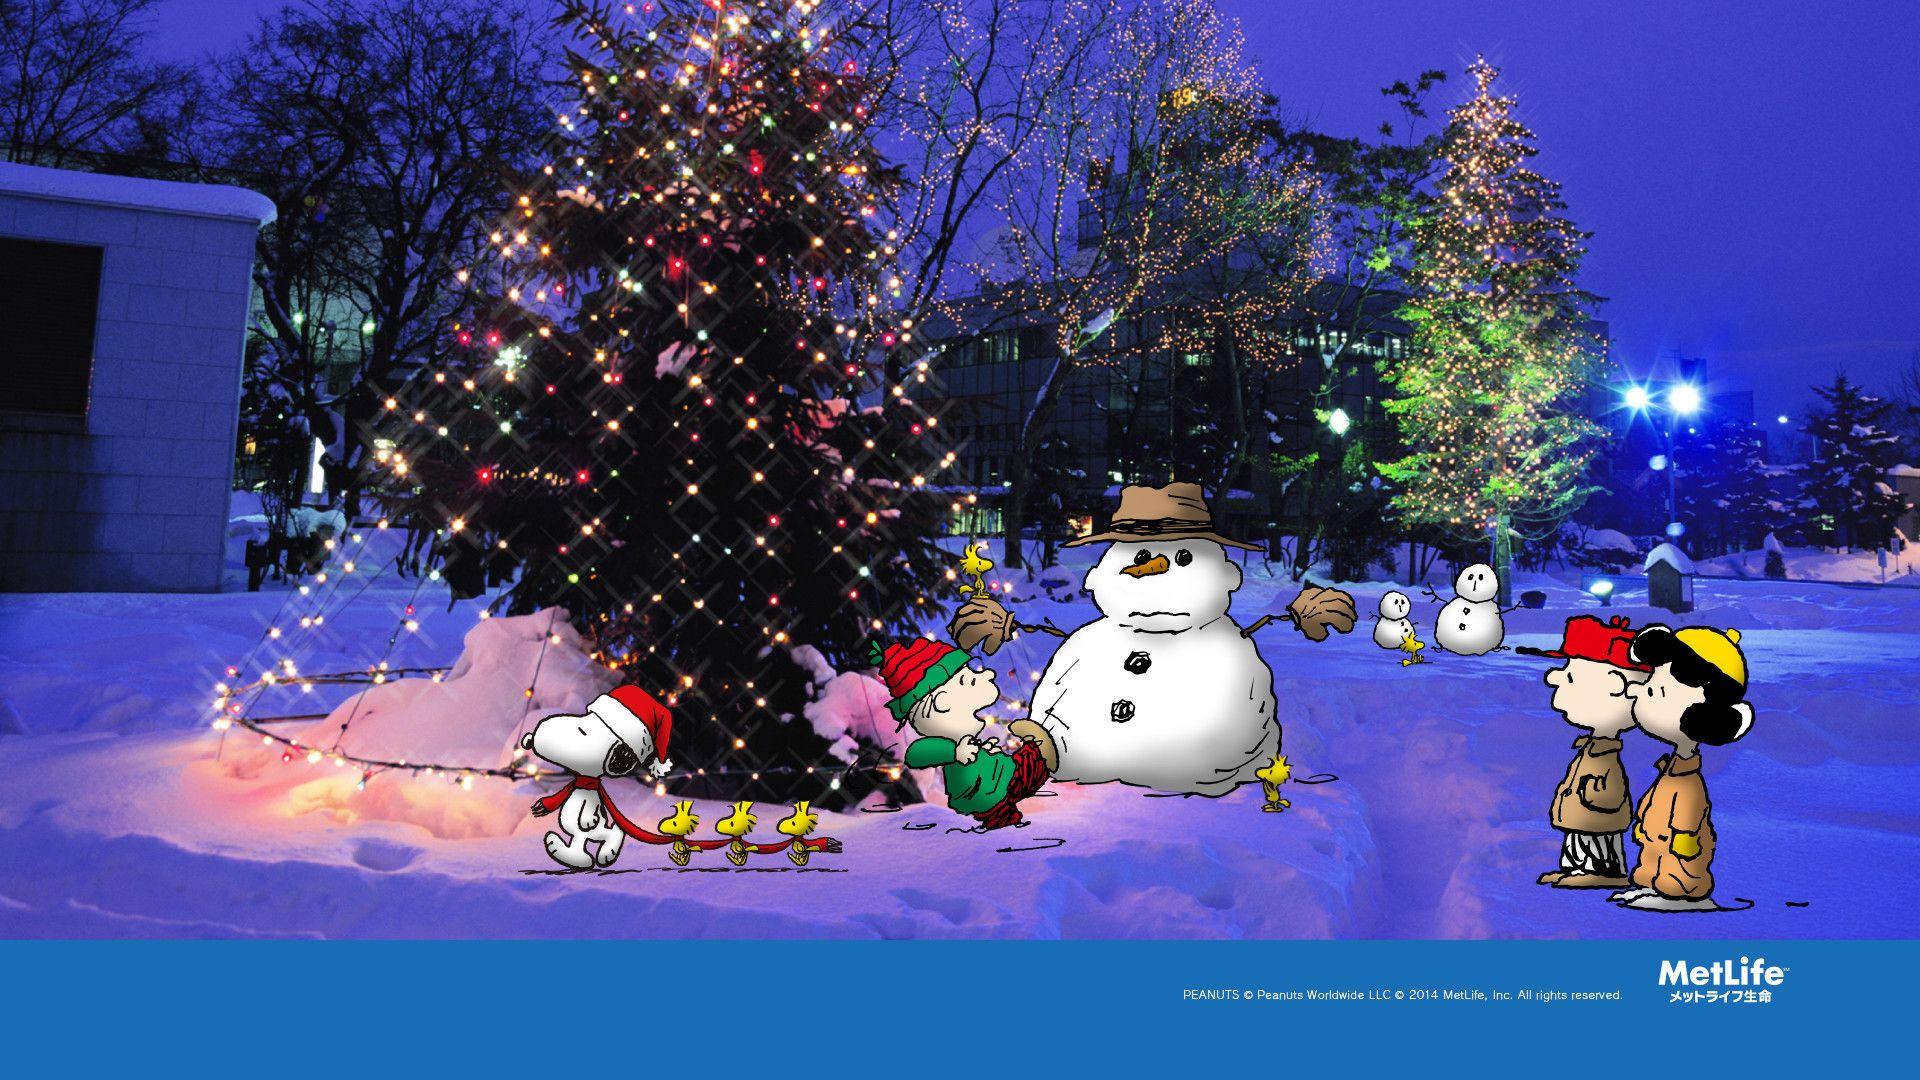 Snoopy Christmas Wallpaper For Computer 56 images